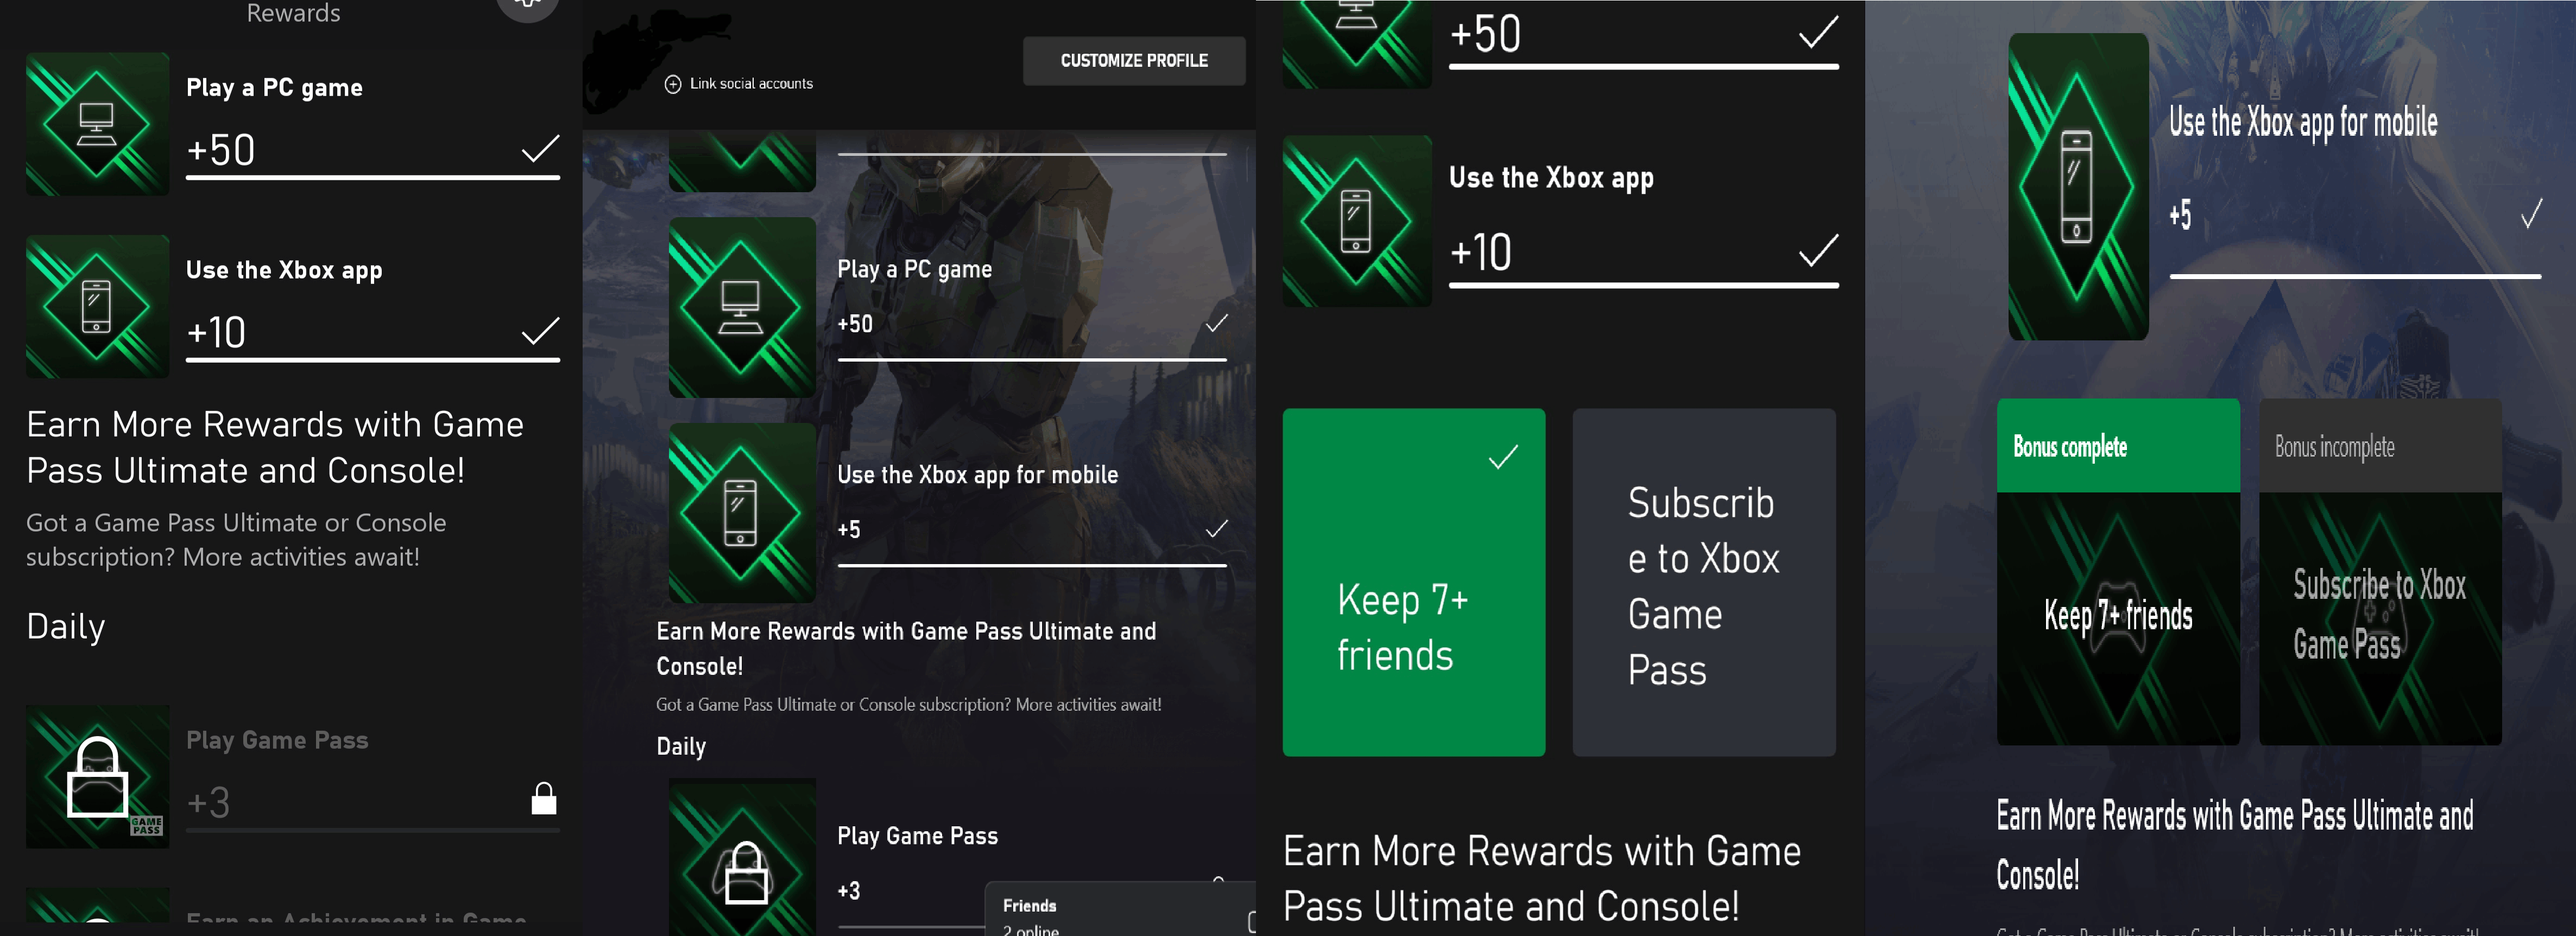 What caused "Keep 7+ friends / Subscribe to Xbox Game Pass" to disappear on both Xbox... [​IMG]